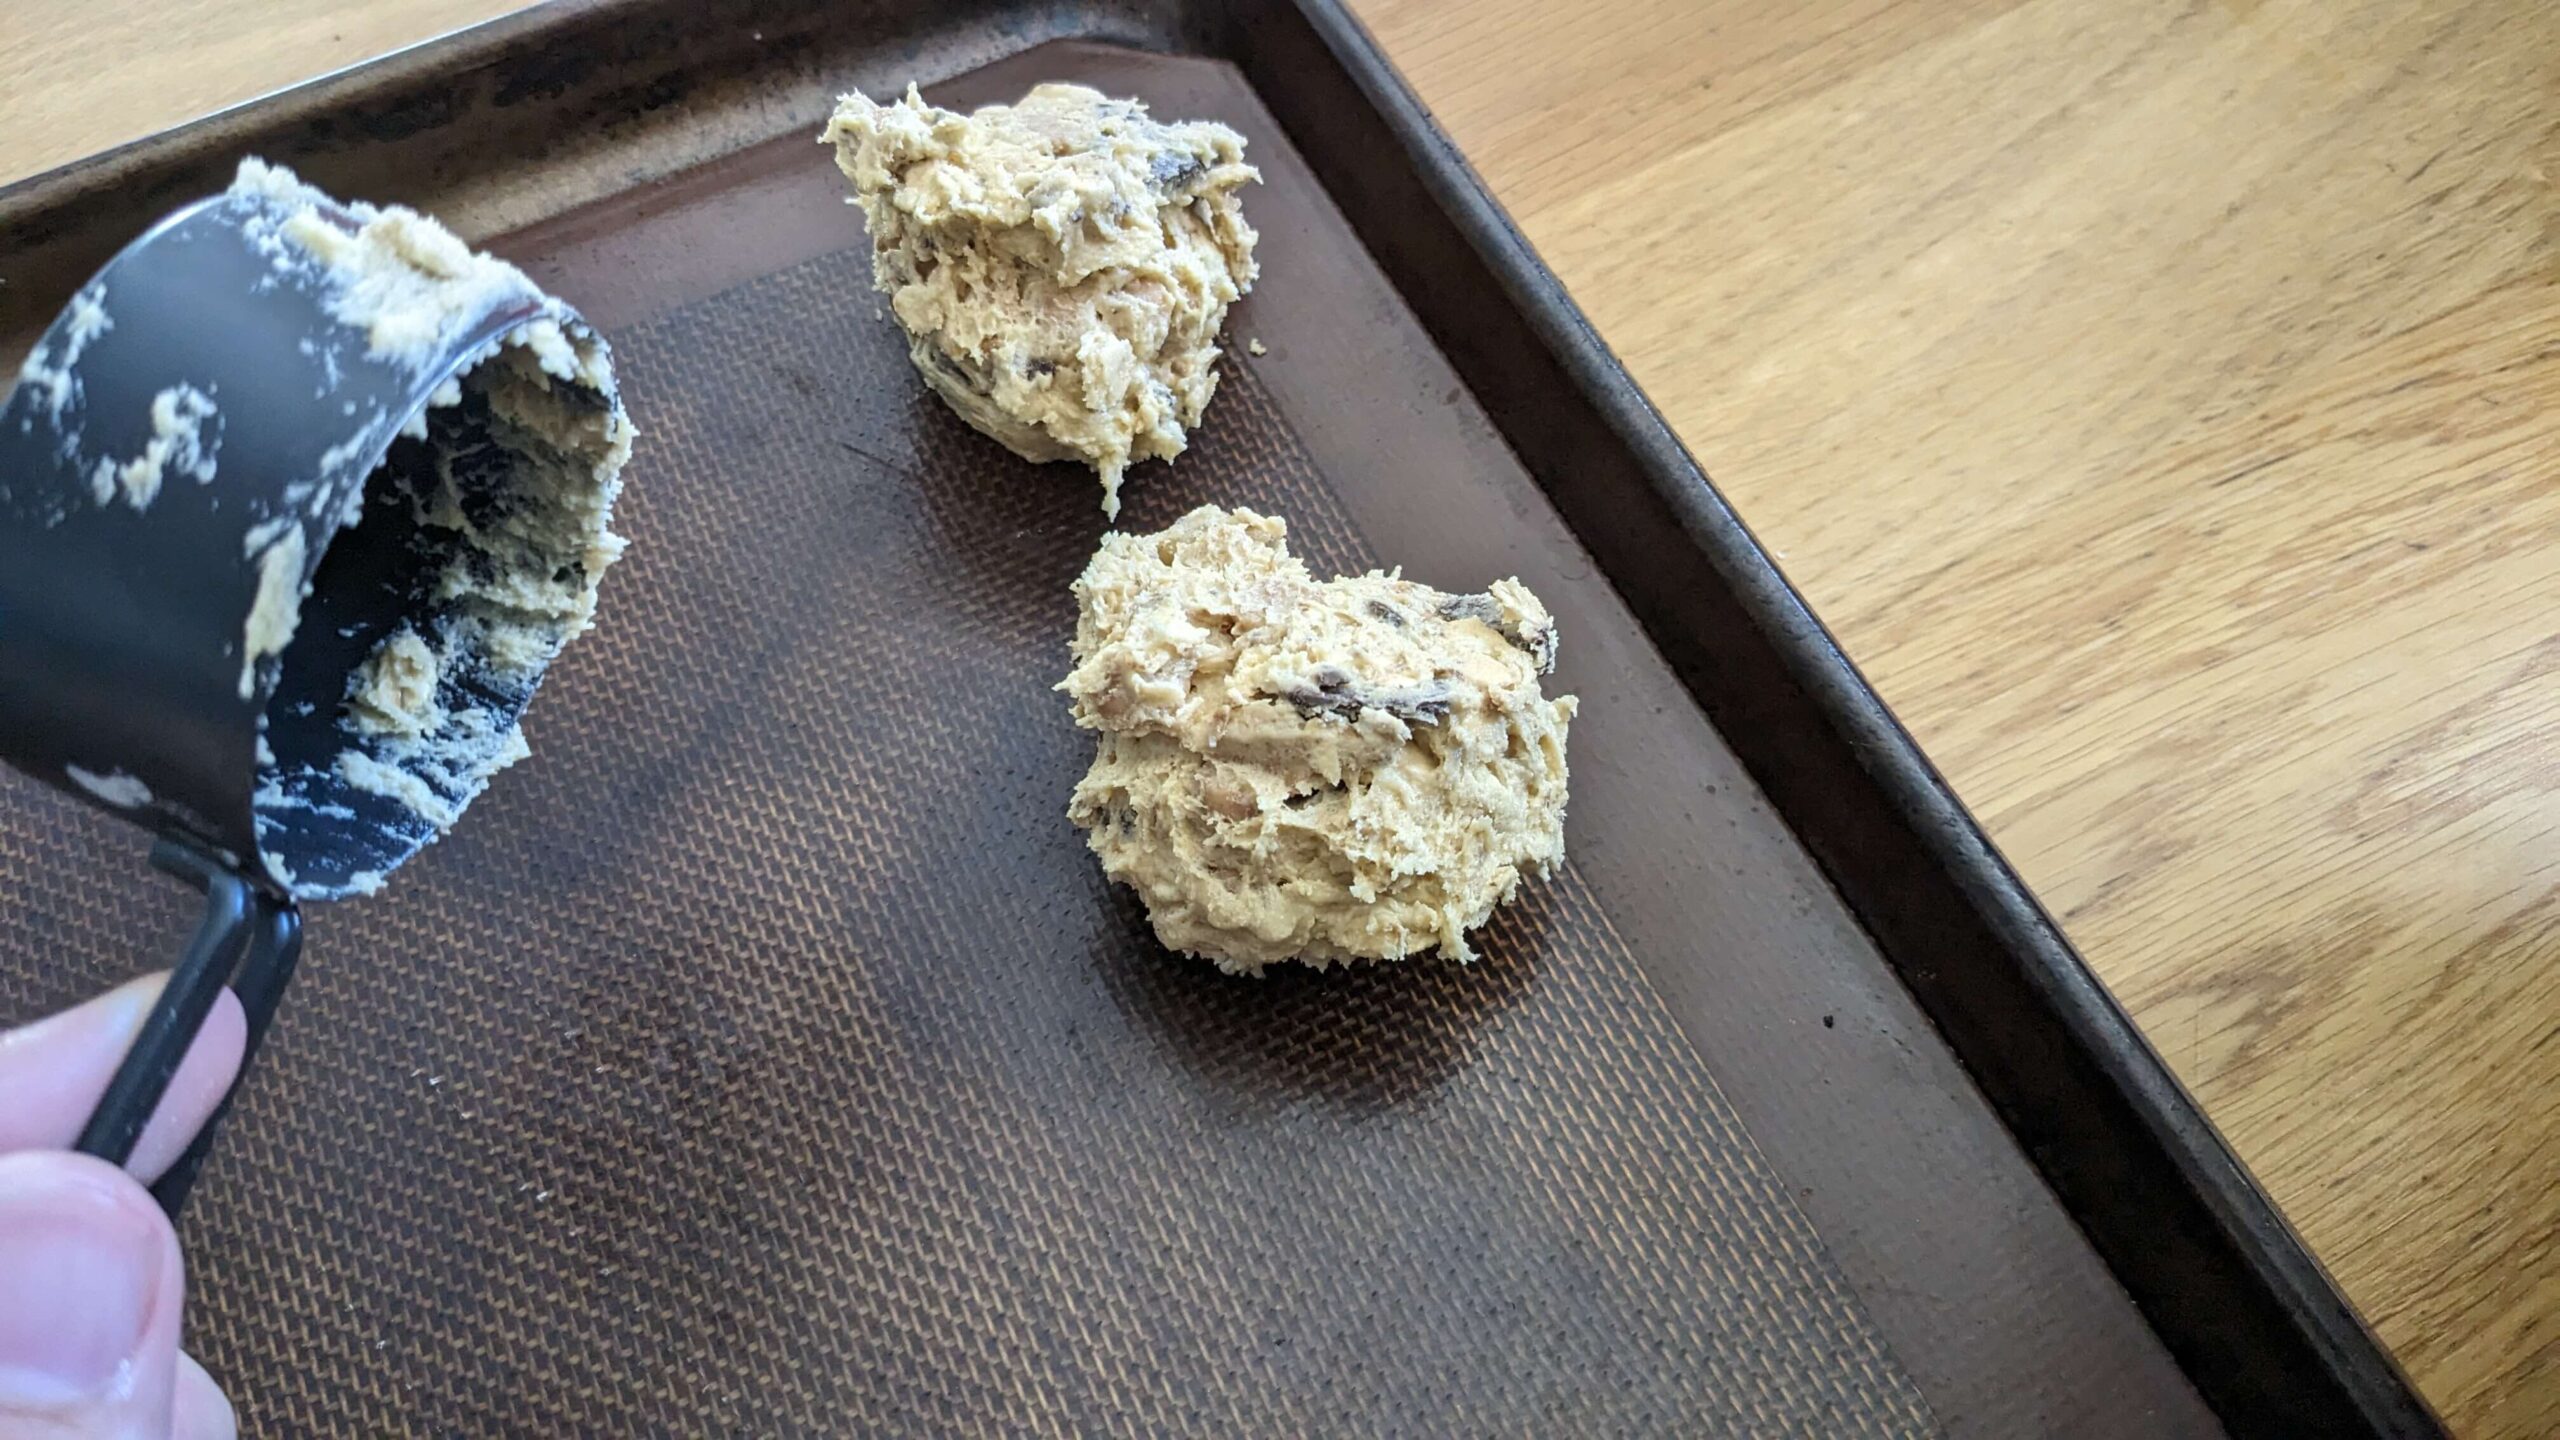 two scoops of cookie dough on a silpat on a baking tray